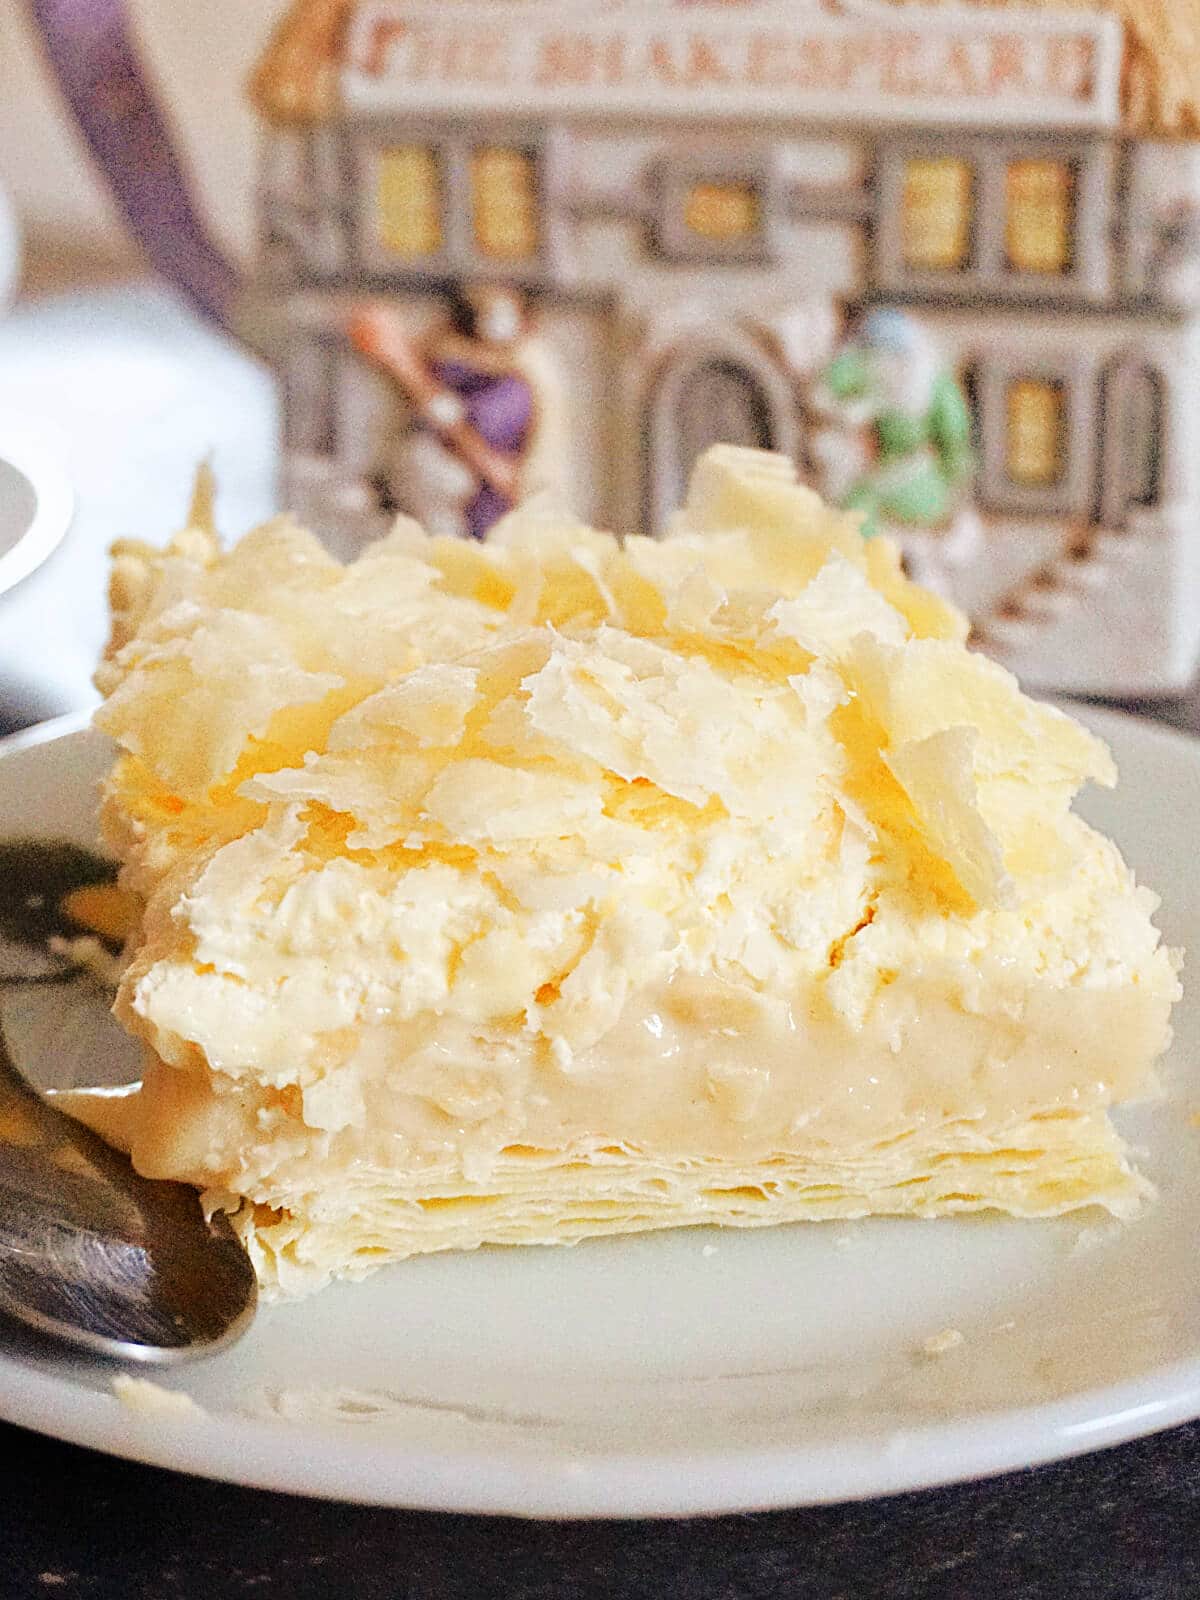 A slice of cremeschnitte on a white plate